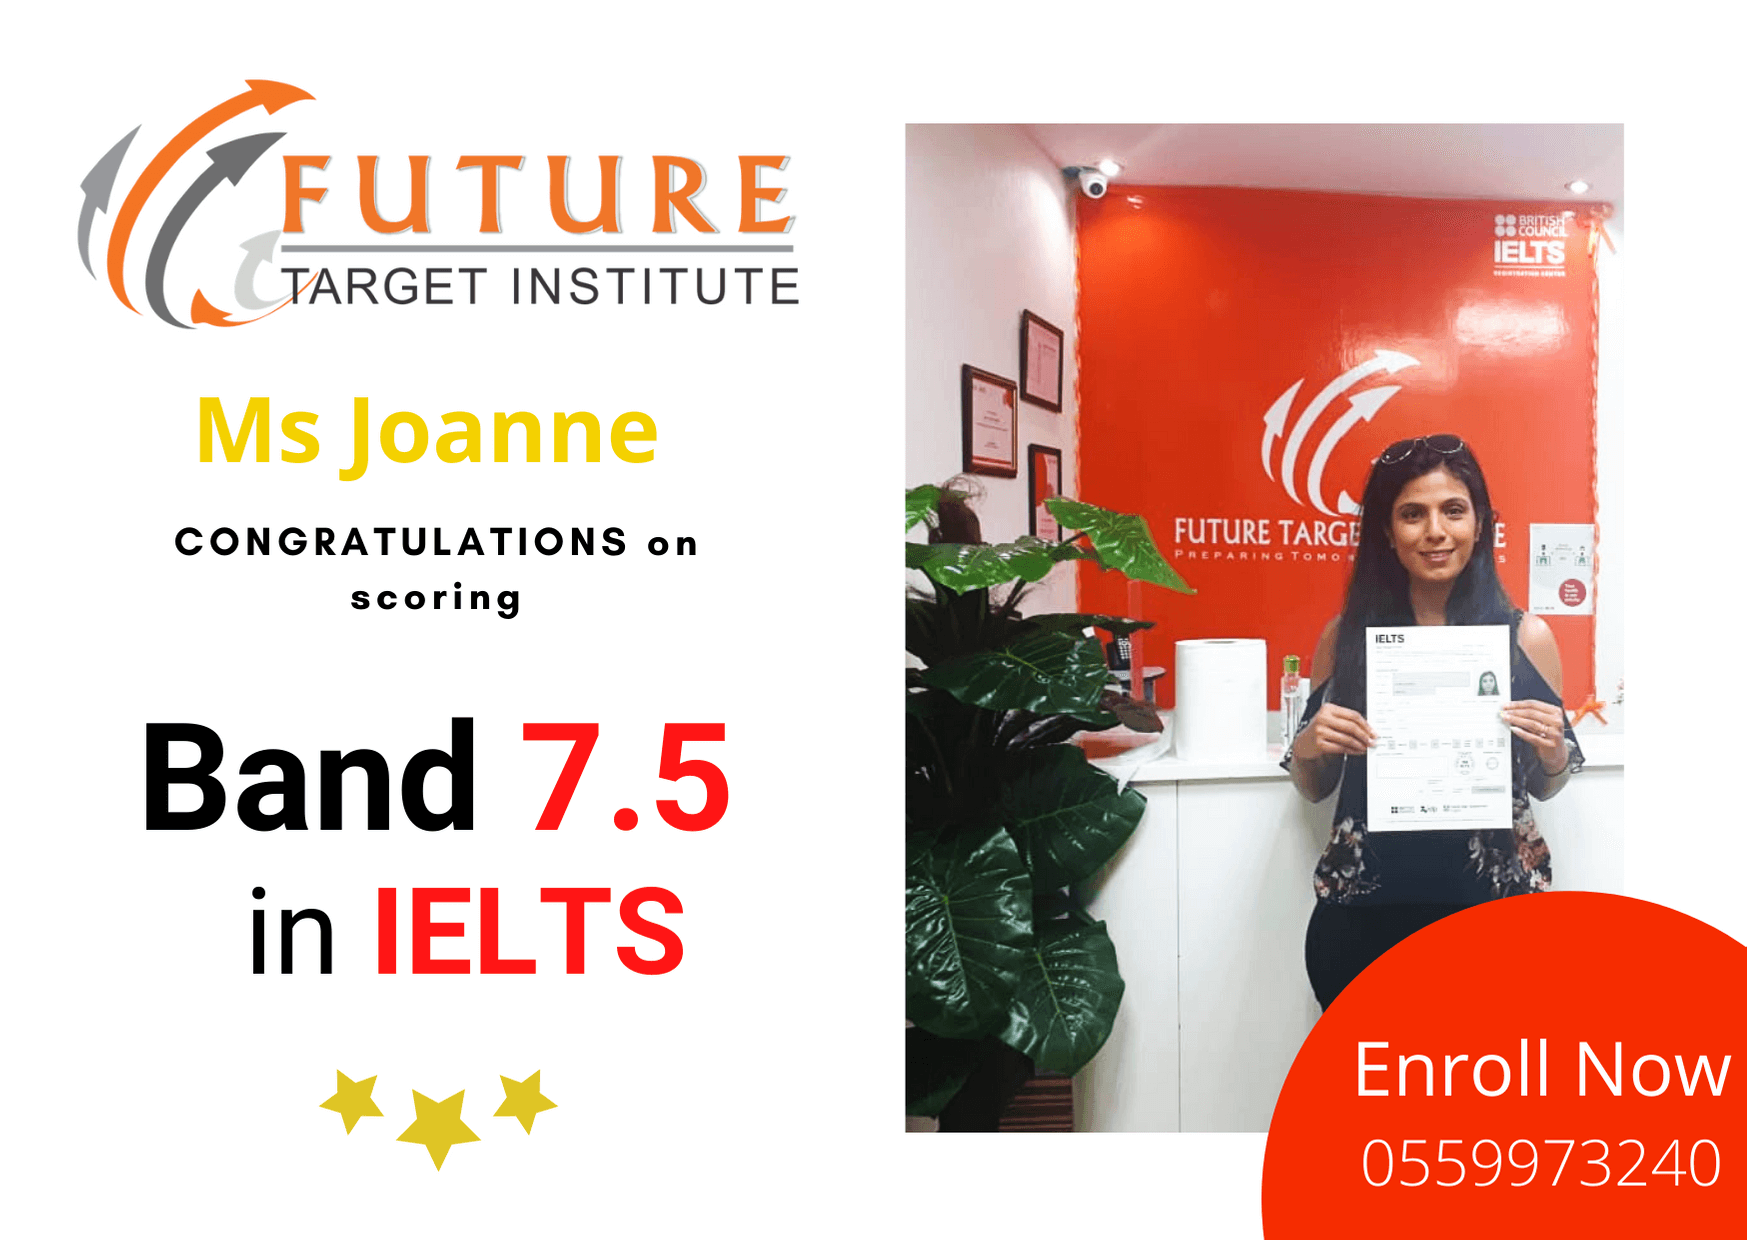 Students preparing for their IELTS Academic exam with Future Target Institute, the best IELTS Coaching Center in Dubai.